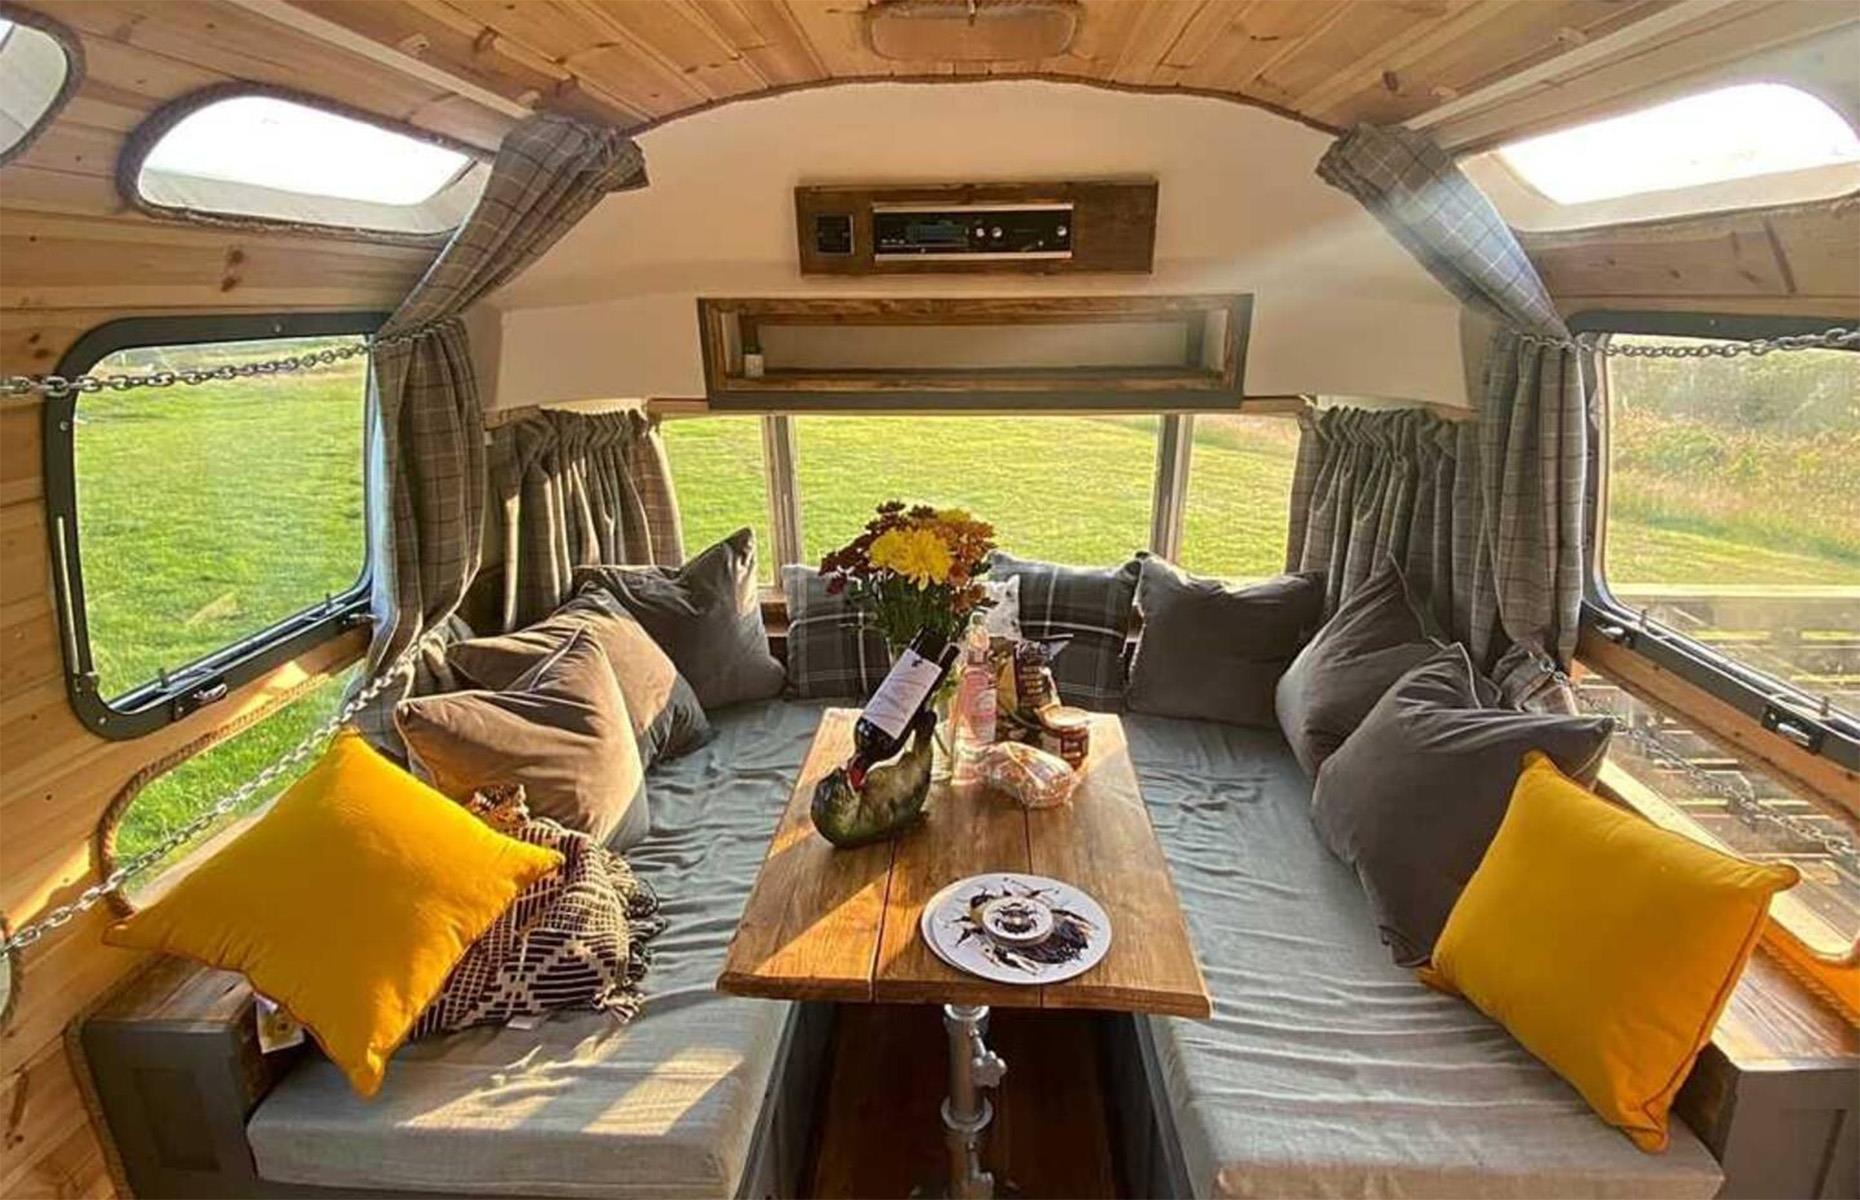 <p>The Airstream includes a fully equipped kitchen, bathroom, bedroom and dining area, which also converts seamlessly into another bed if required.</p>  <p>The interiors are finished to a high standard, with cozy soft furnishings which complement the light wood paneling that runs throughout the space.</p>